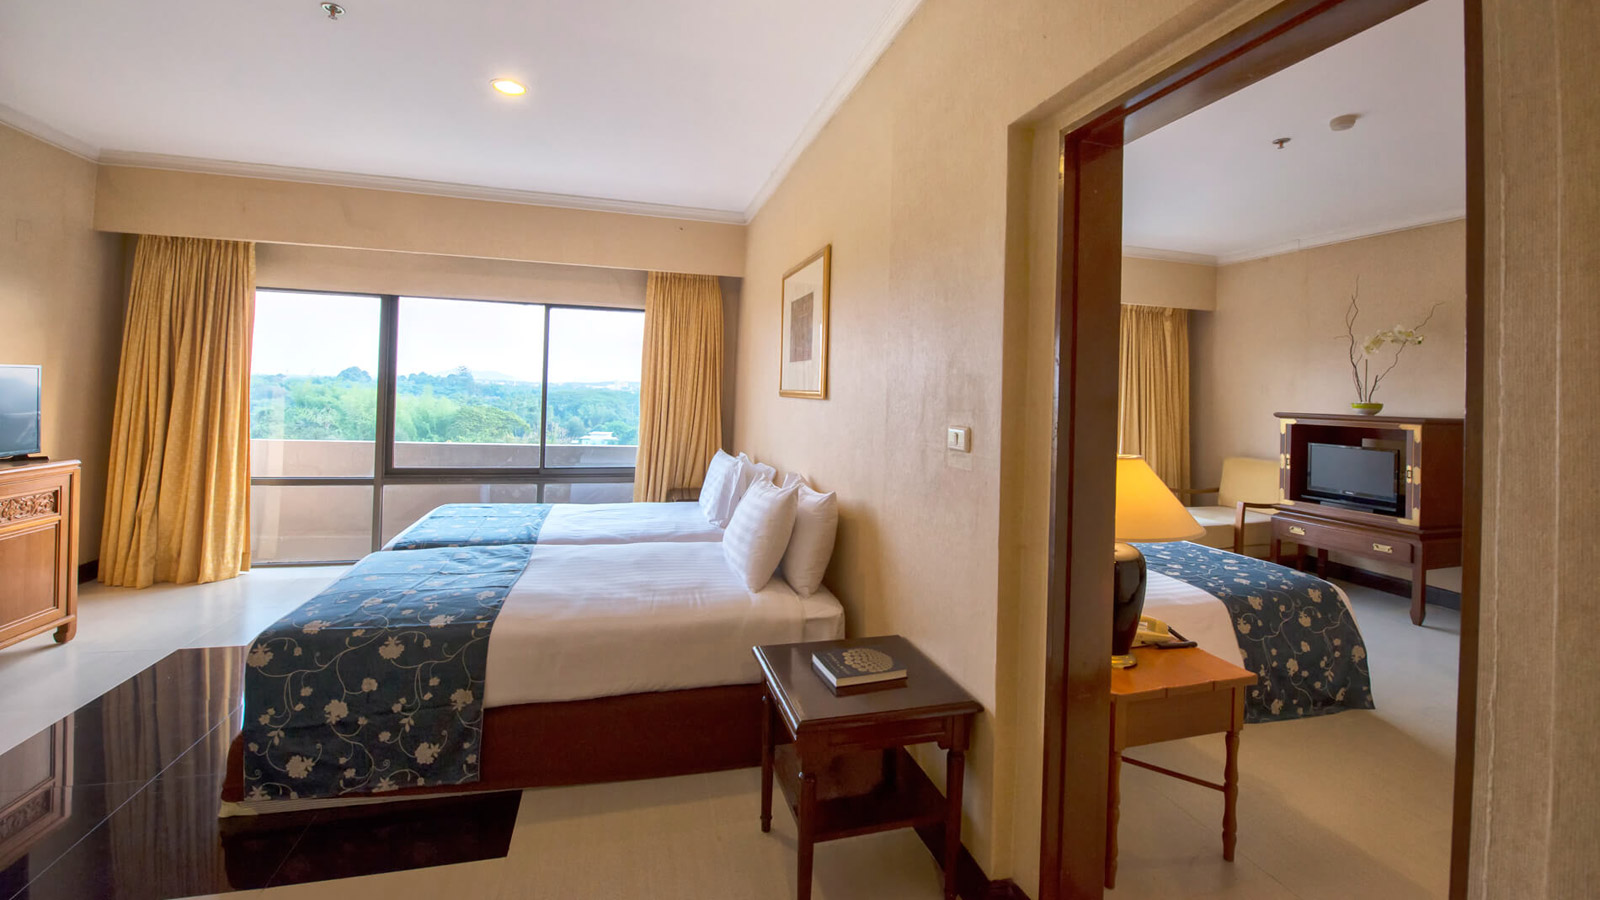 Junior Family Suites at Loei Palace Hotel